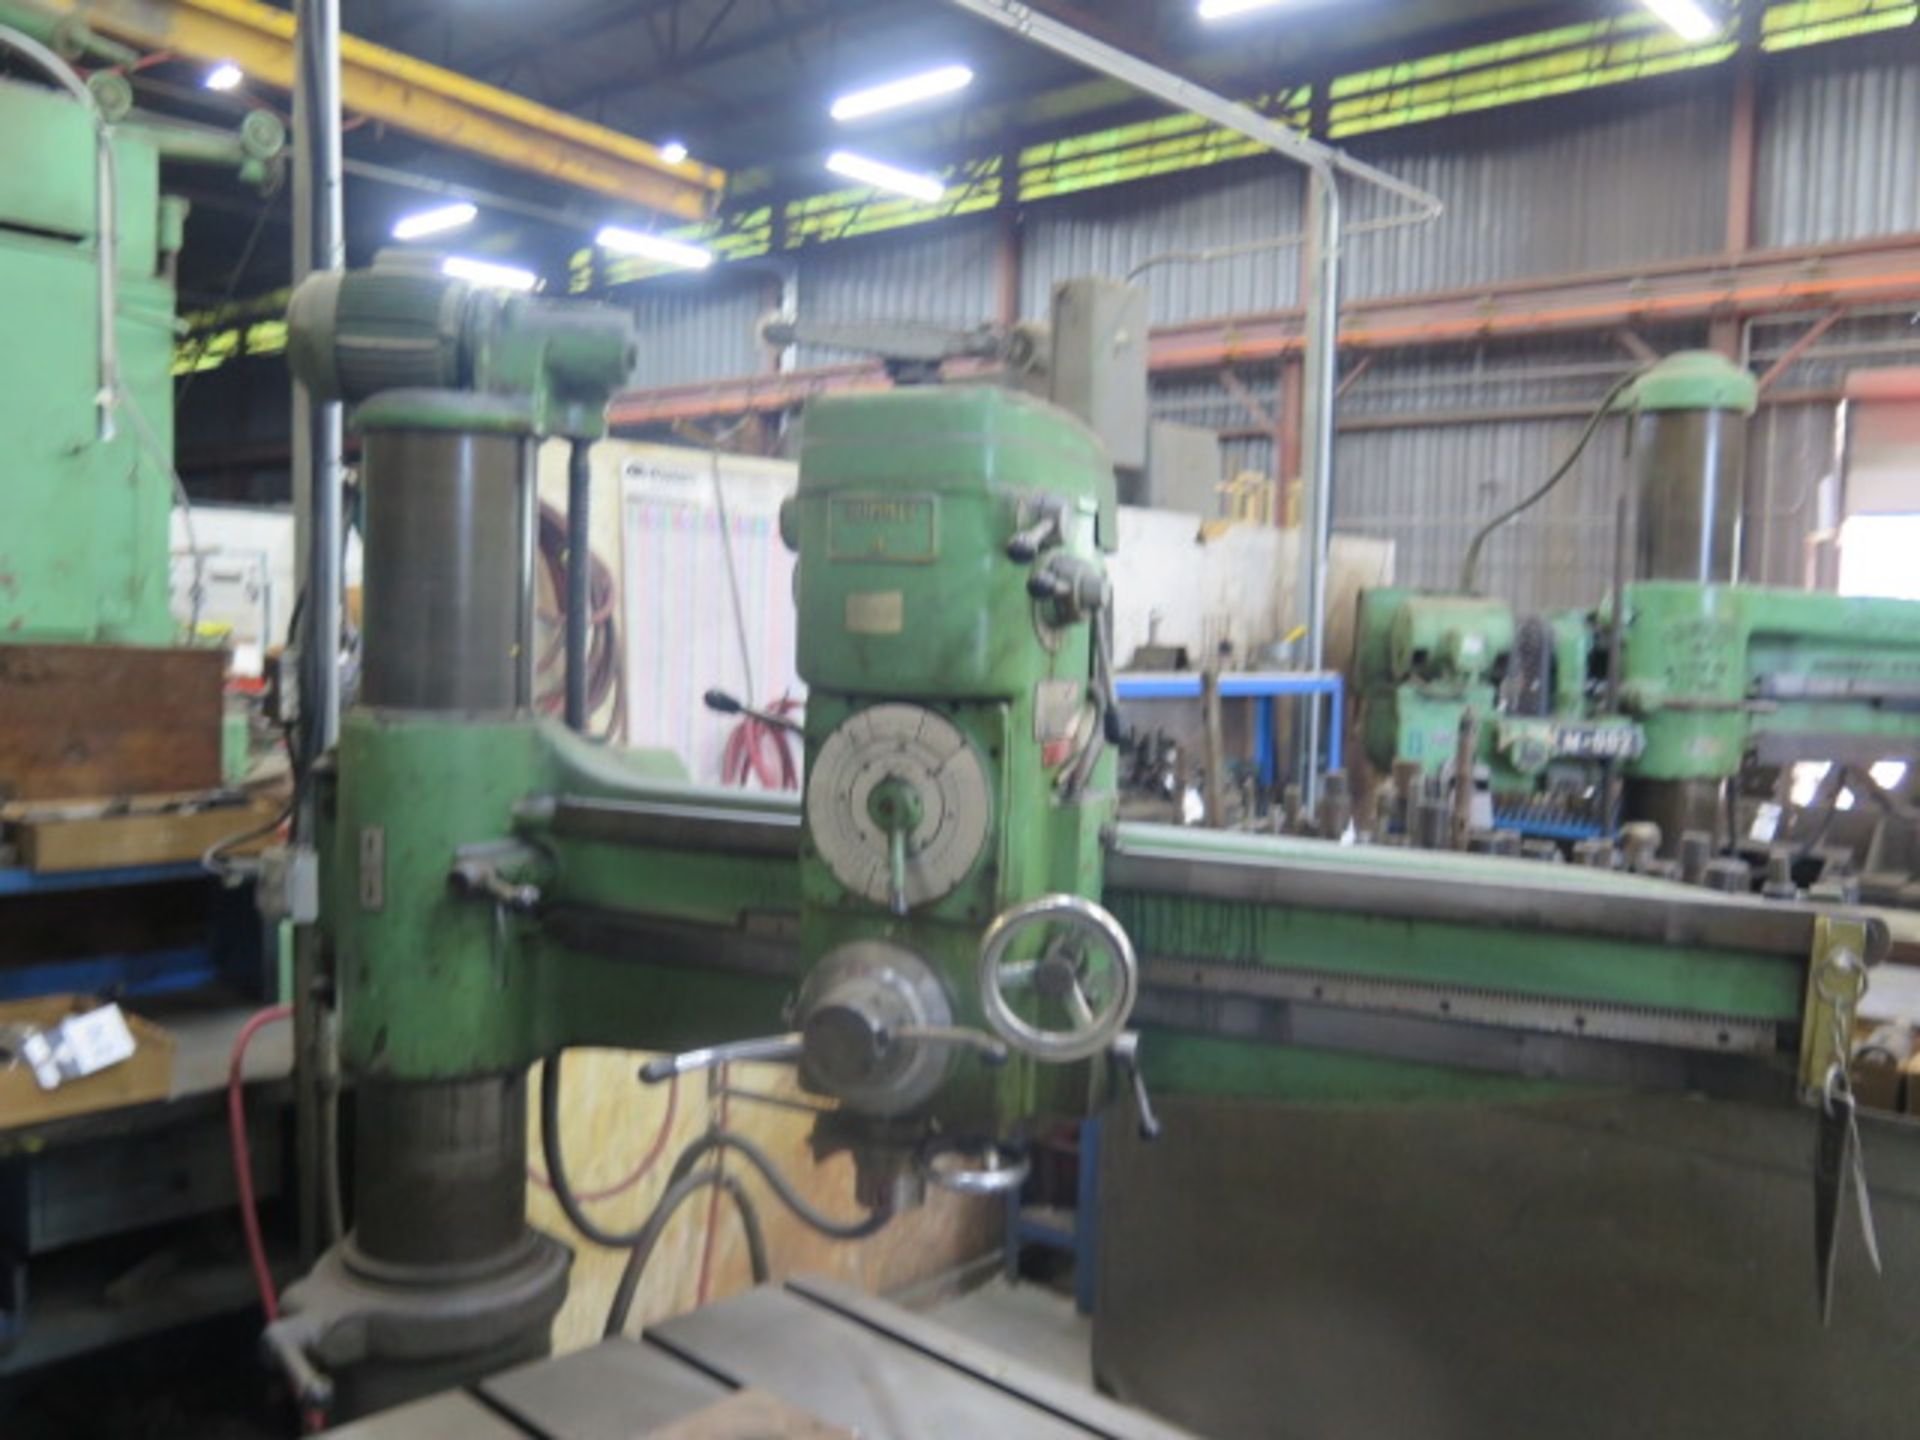 Summit 8” Column x 42” Radial Arm Drill w/ 60-2000 RPM, Power Column and Feeds, SOLD AS IS - Image 4 of 10